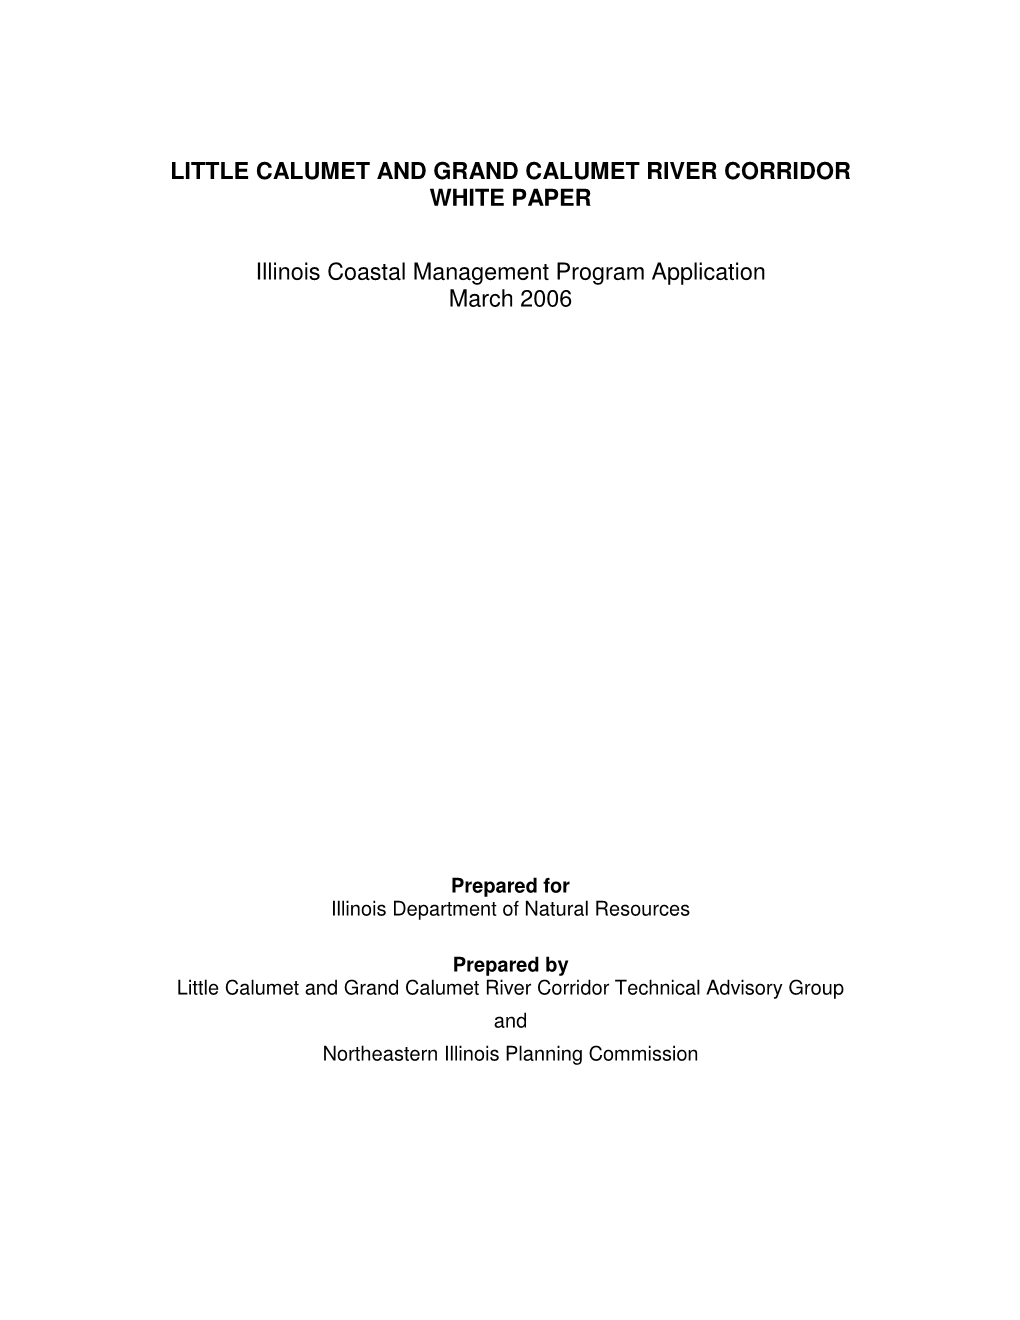 Little Calumet and Grand Calumet River White Paper, Northeastern Illinois Planning Commission